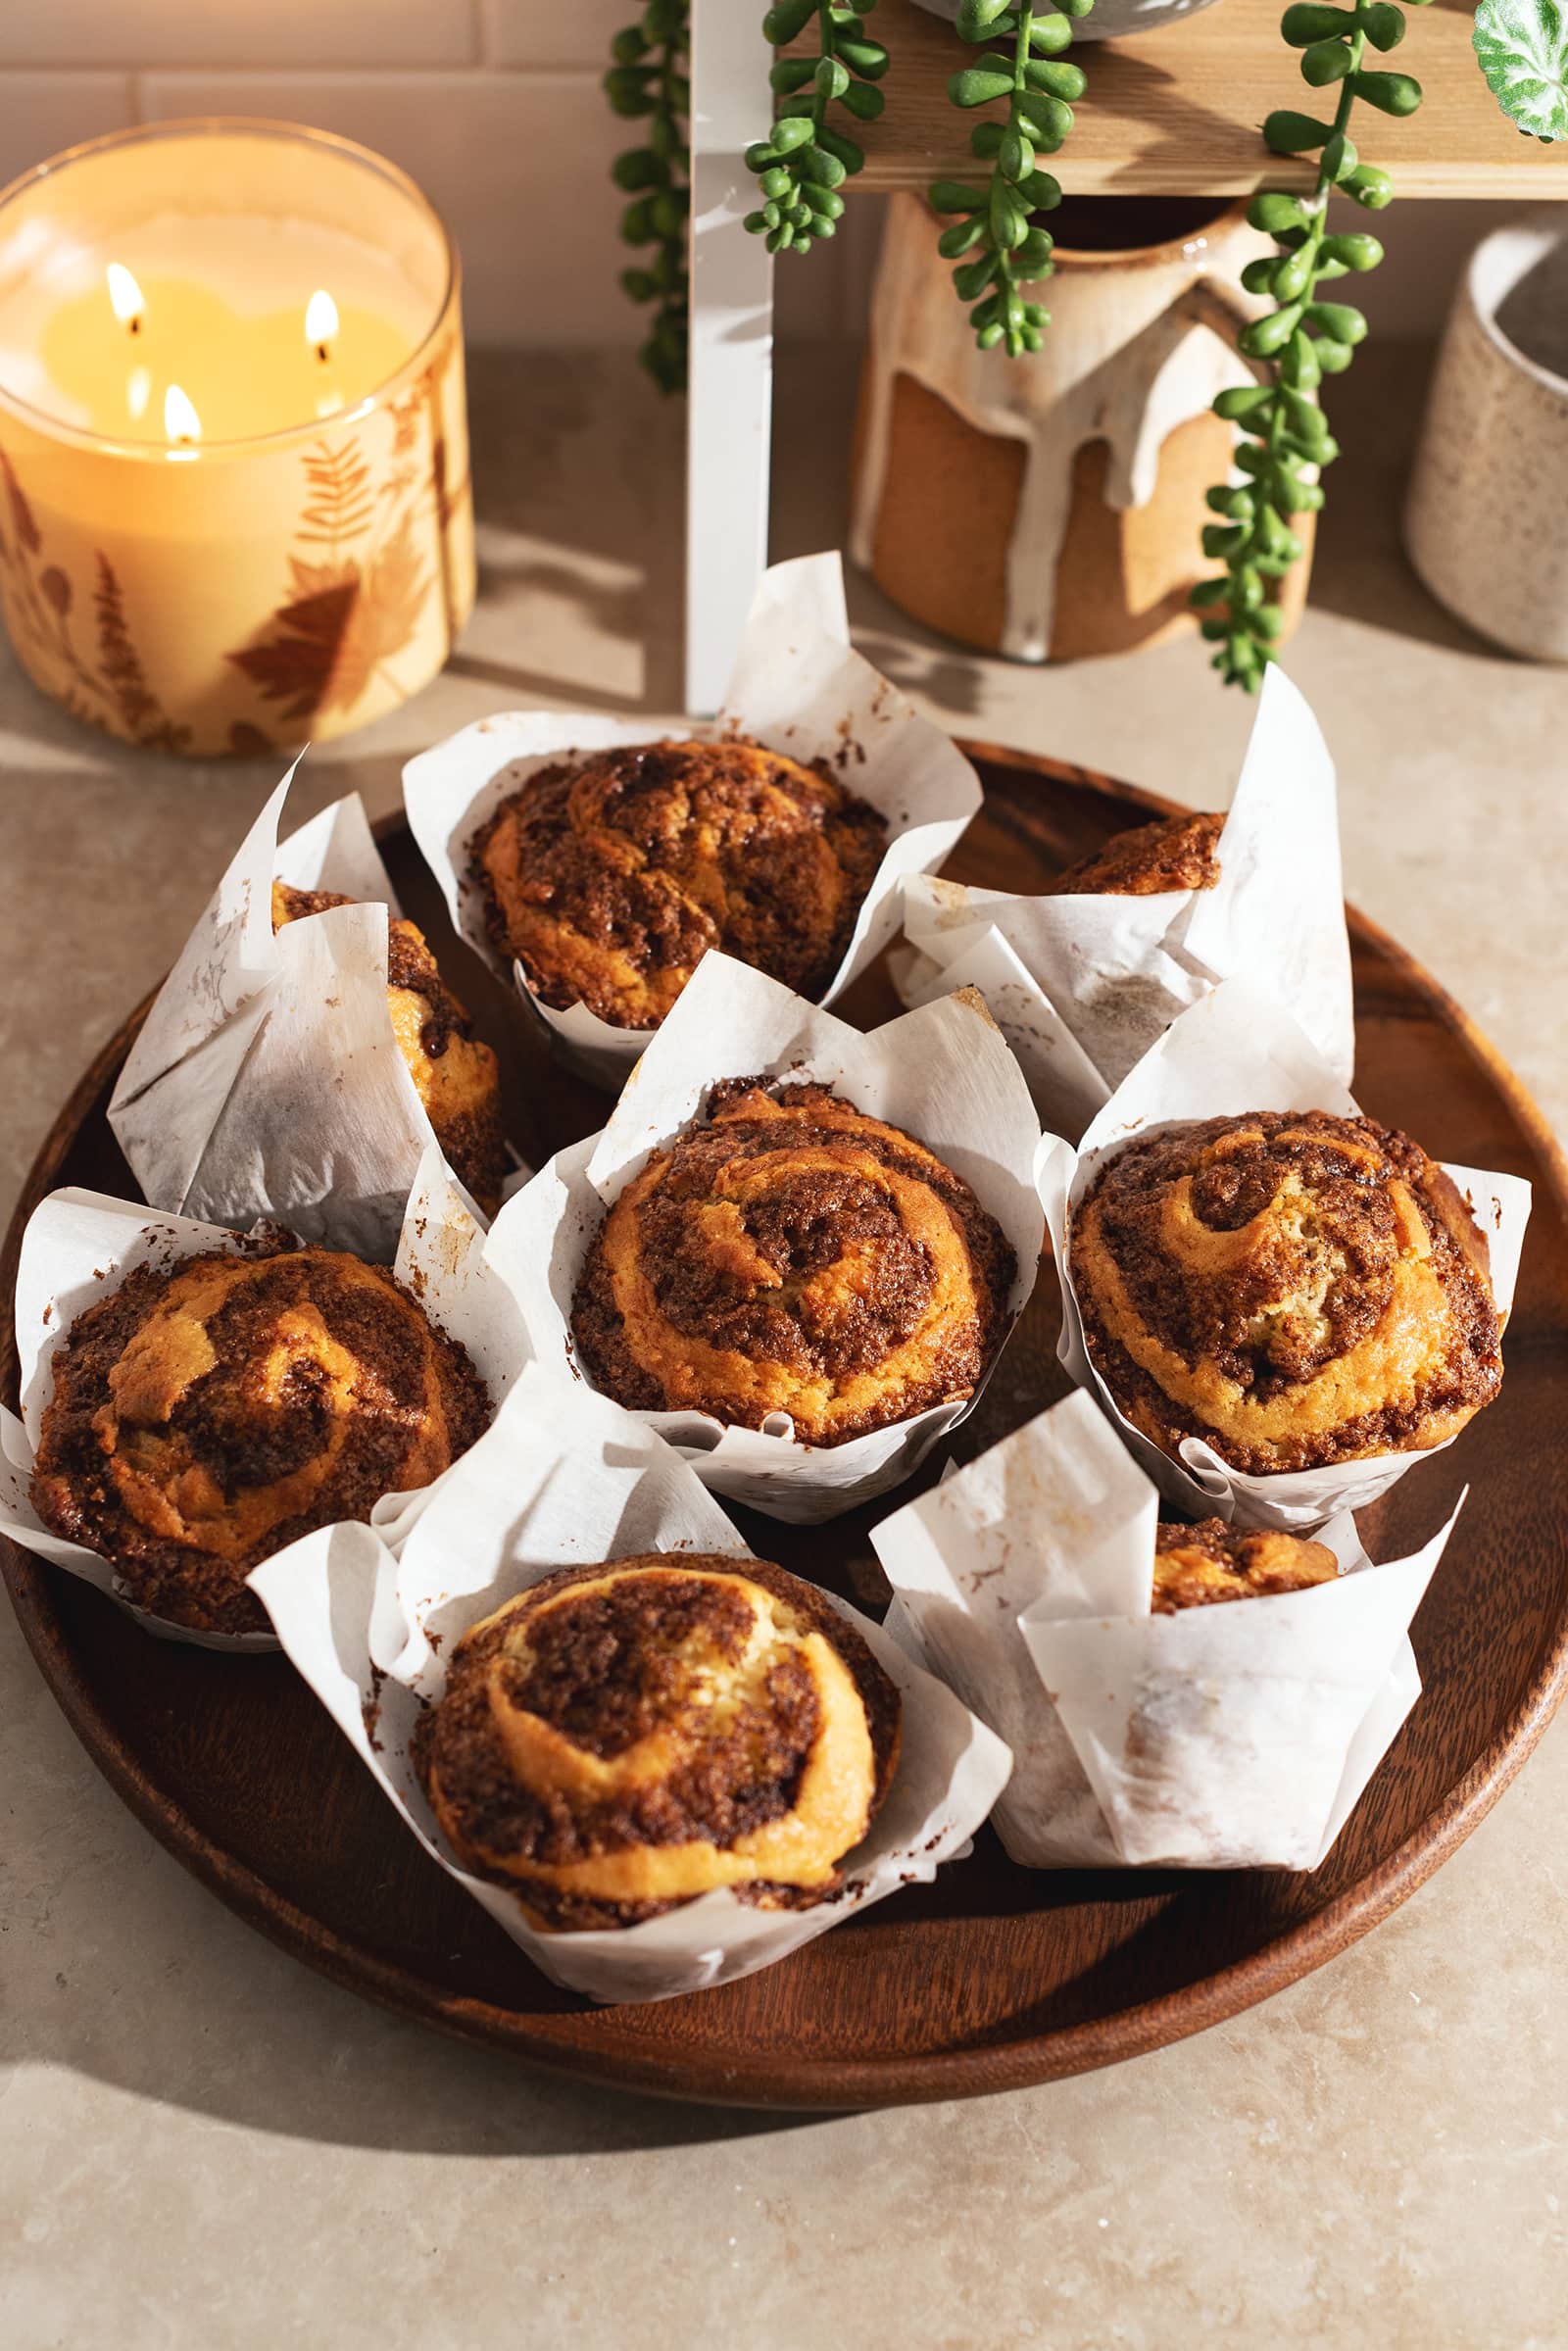 Cinnamon roll muffins in muffin liners on a wooden platter.